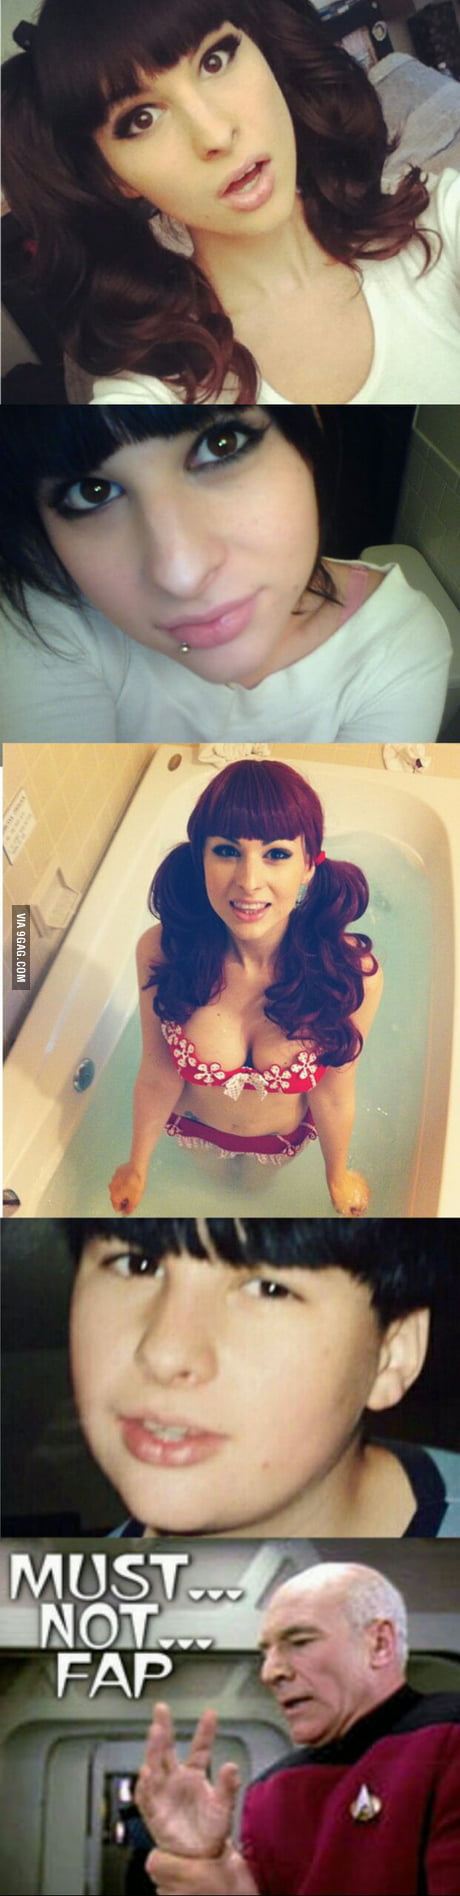 debbie charboneau recommends bailey jay before and after pic